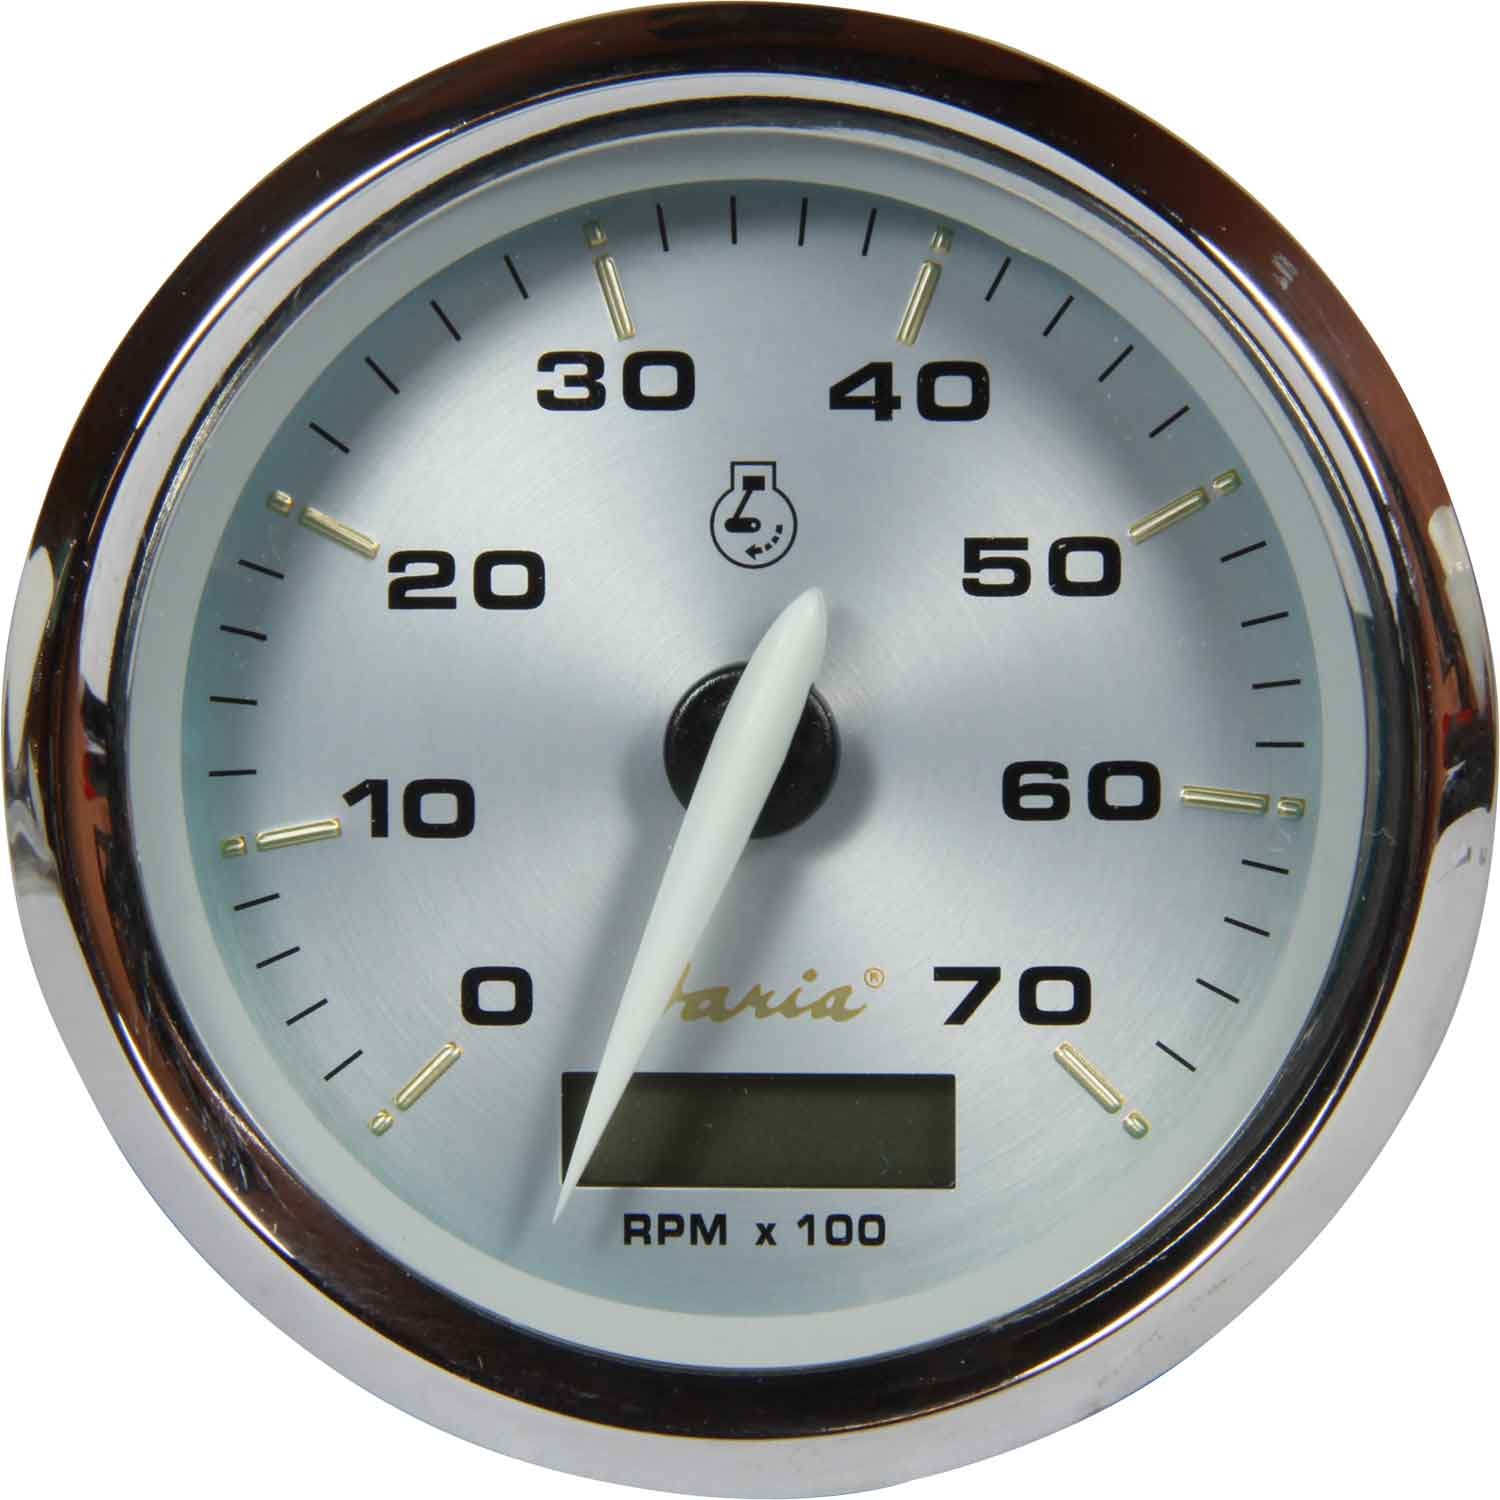 Details about   New 947434 Beede Instruments NexSysLink 0-40 RPM Tach With Display 